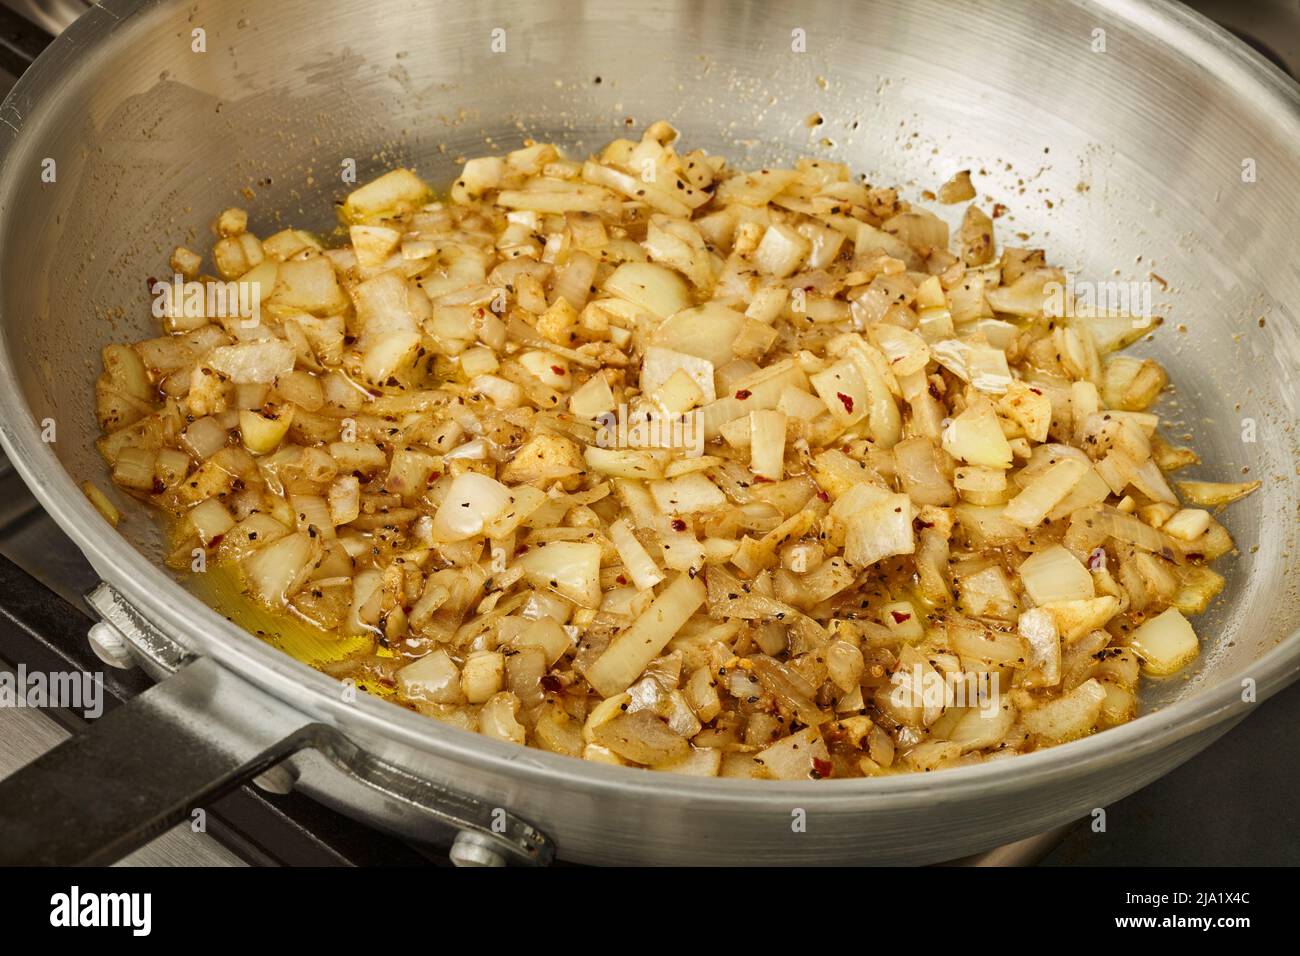 Onions caramelizing in a steel skillet Stock Photo